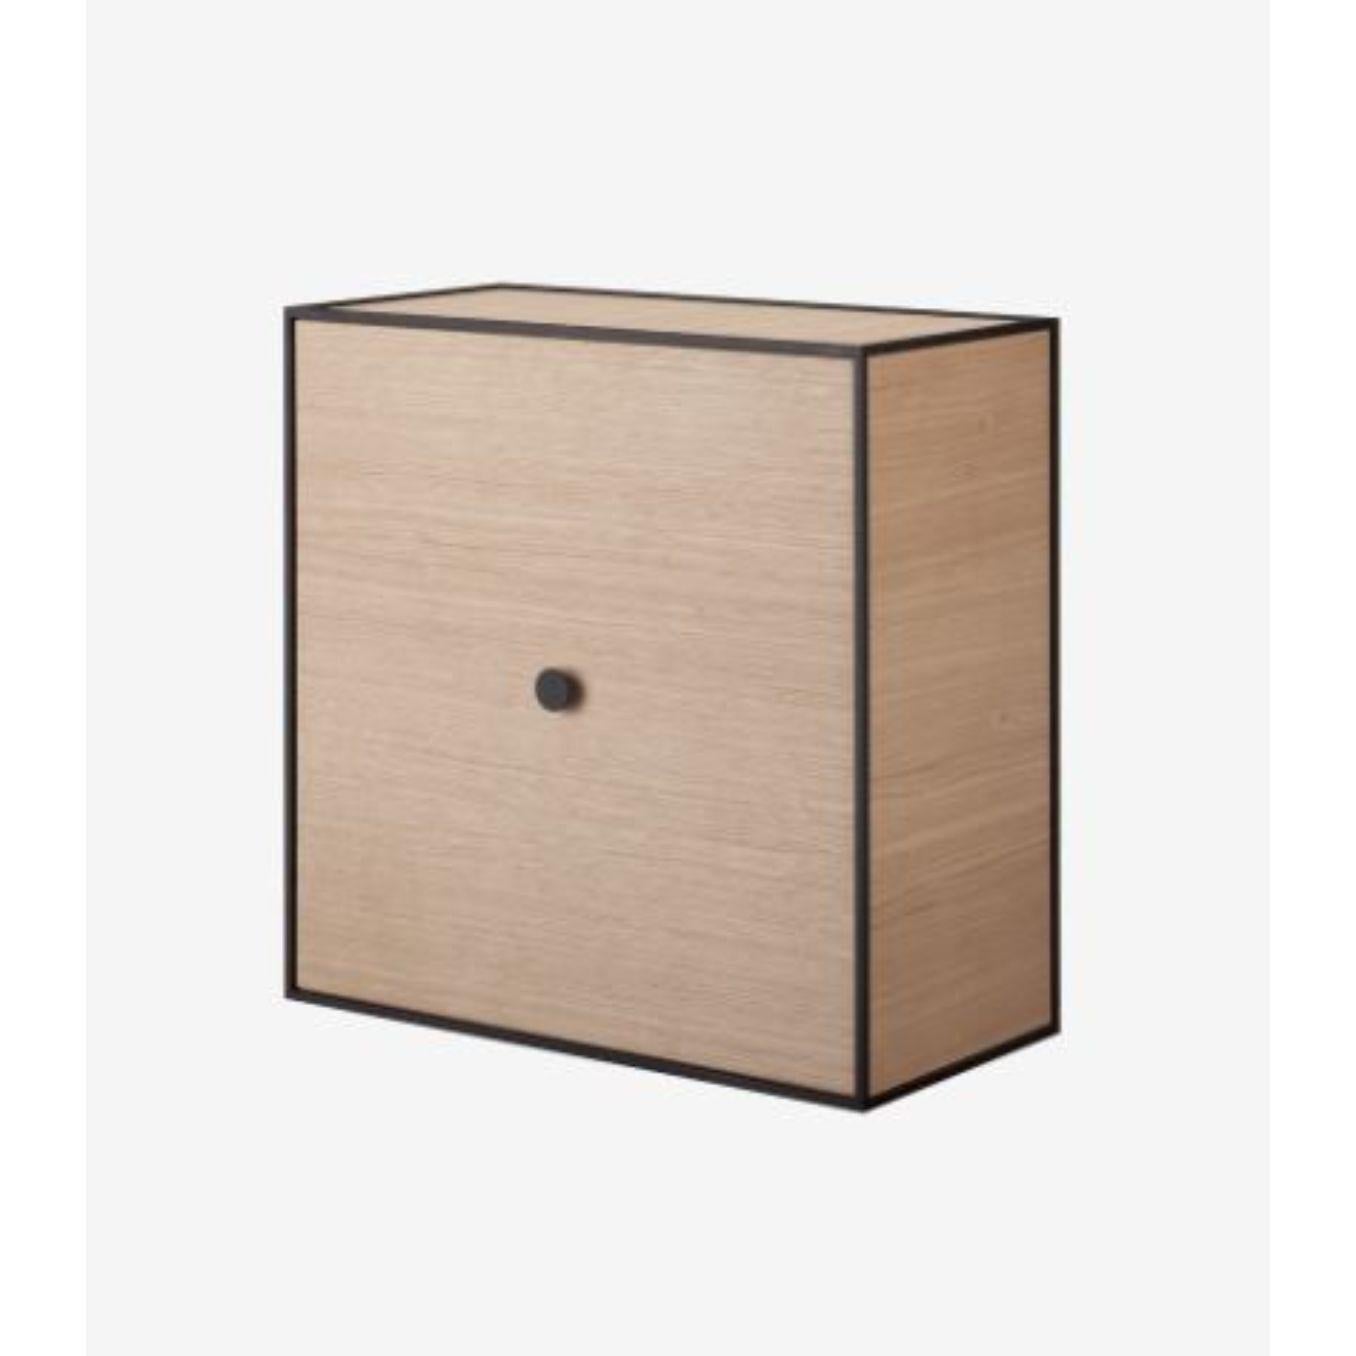 42 oak frame box with door by Lassen
Dimensions: D 42 x W 21 x H 42 cm 
Materials: Finér, Melamin, Melamin, Melamine, metal, veneer, oak
Also available in different colors and dimensions.
Weight: 11.50 Kg

By Lassen is a Danish design brand